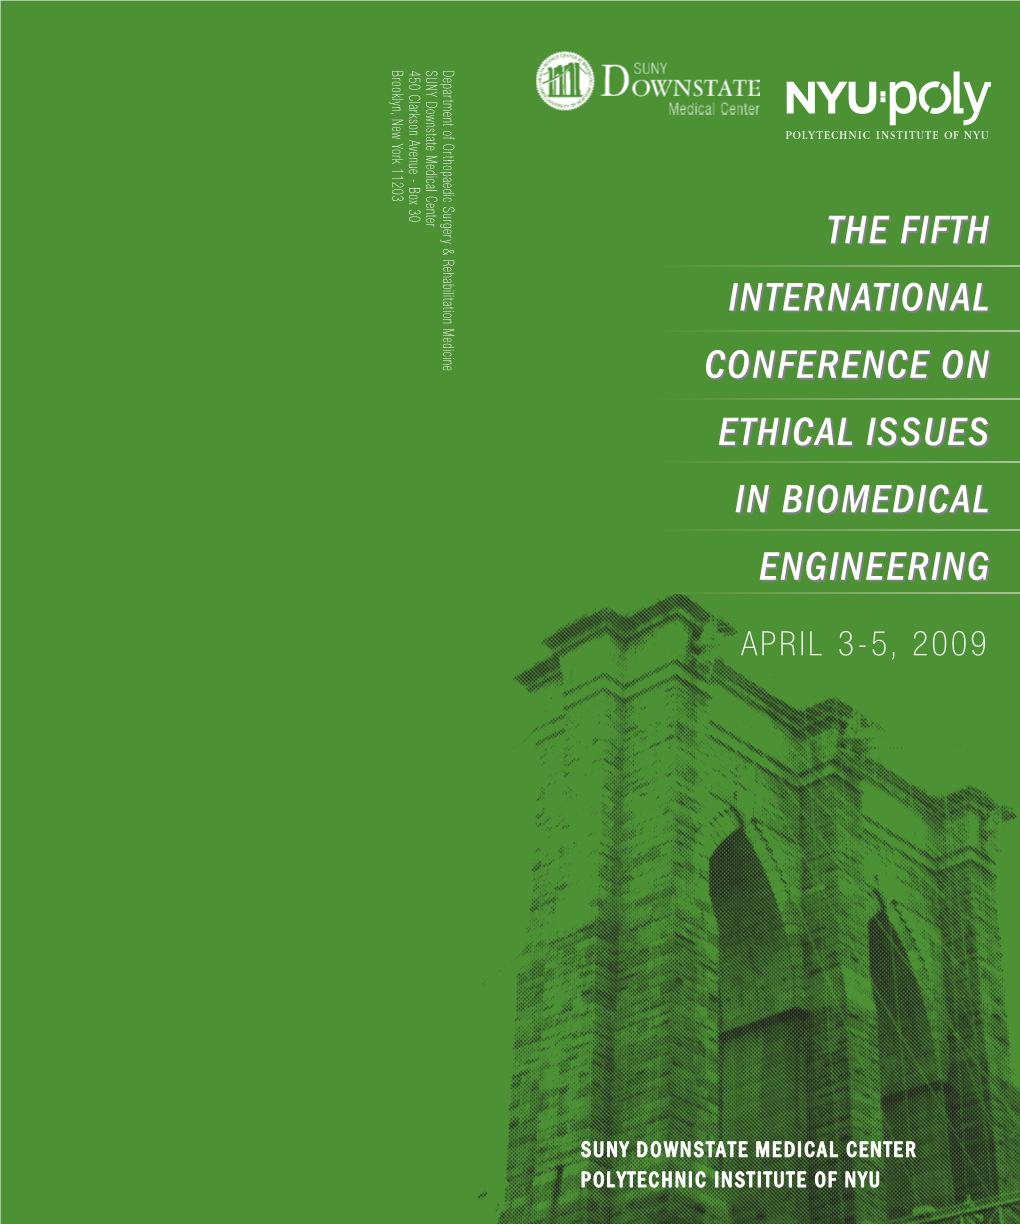 The Fifth International Conference on Ethical Issues in Biomedical Engineering